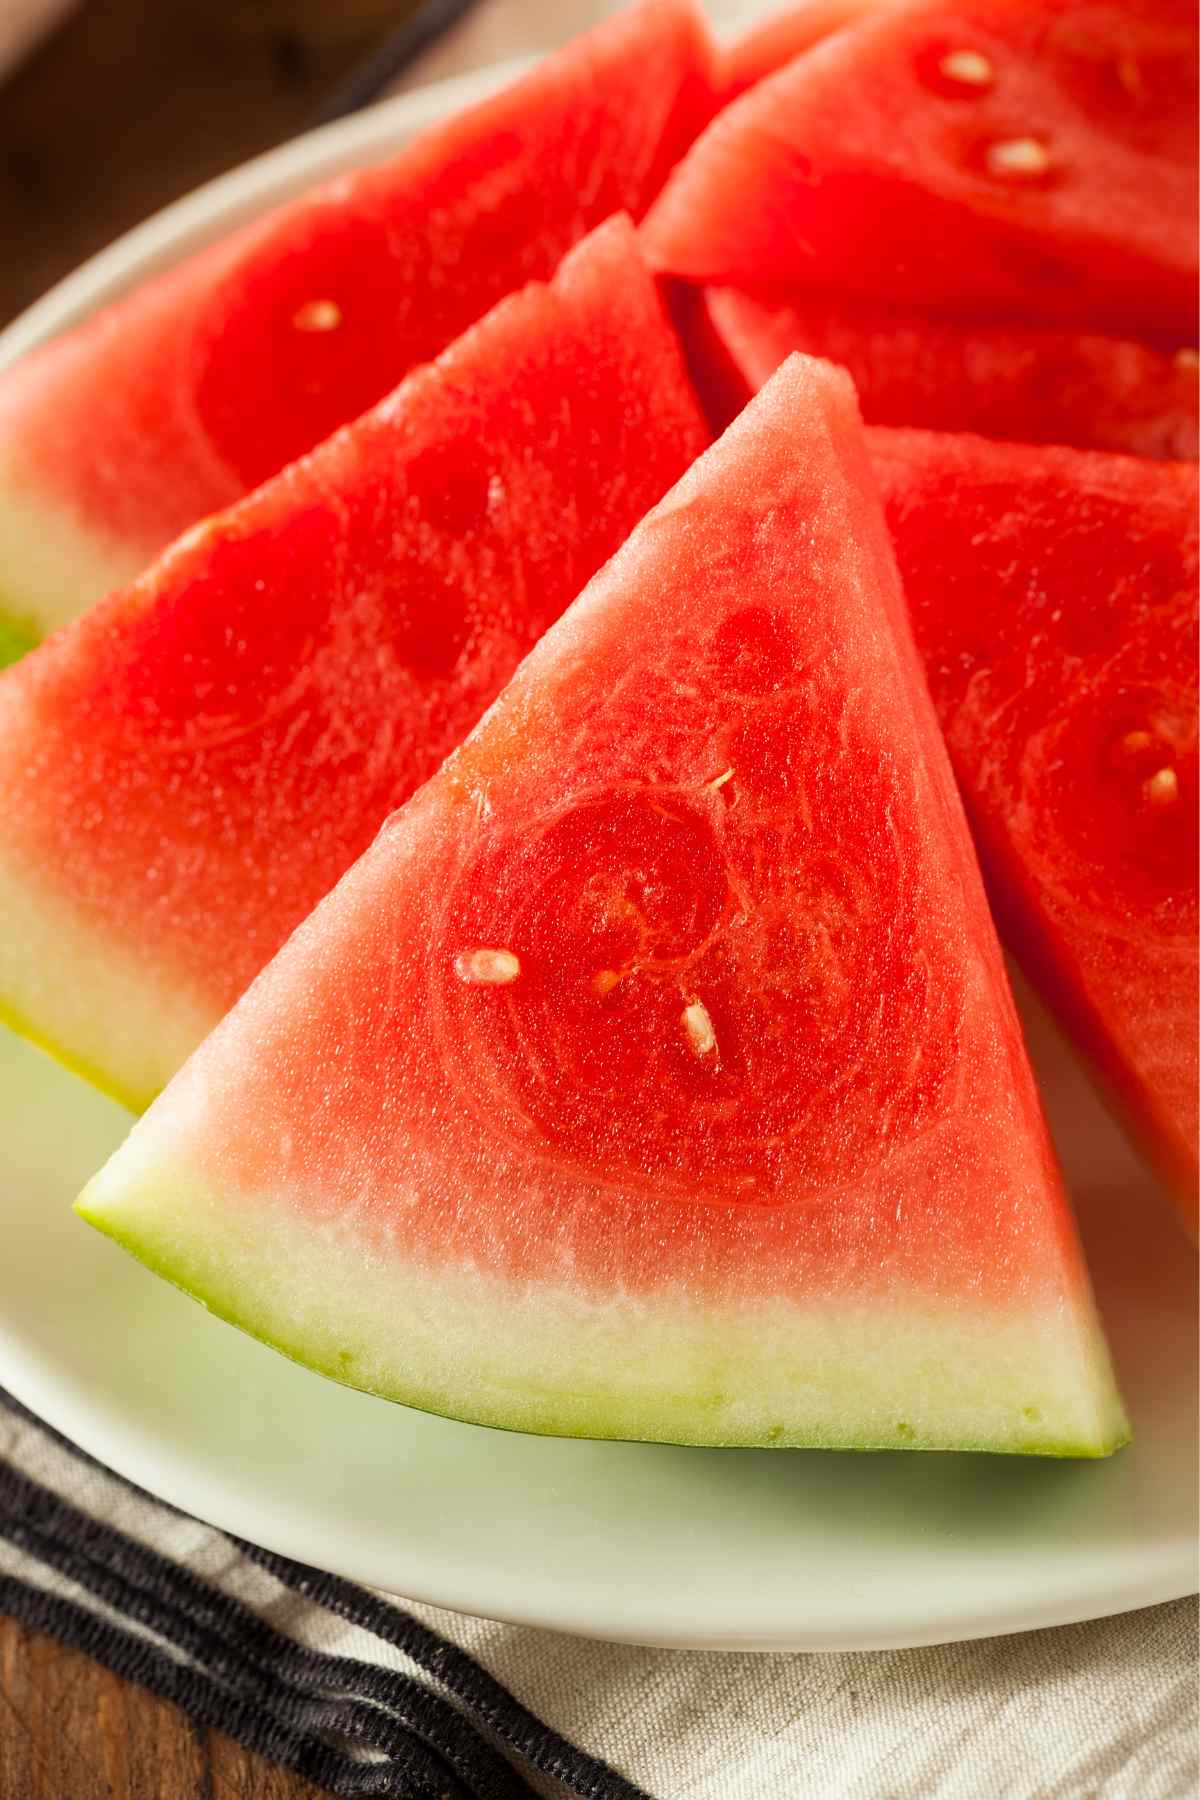 Is watermelon keto-friendly? How many carbs does watermelon have? If you're on a keto diet and curious about whether watermelon is a suitable choice, read on. In this post, you’ll learn whether watermelon is good for keto and a low-carb keto watermelon recipe you can try.